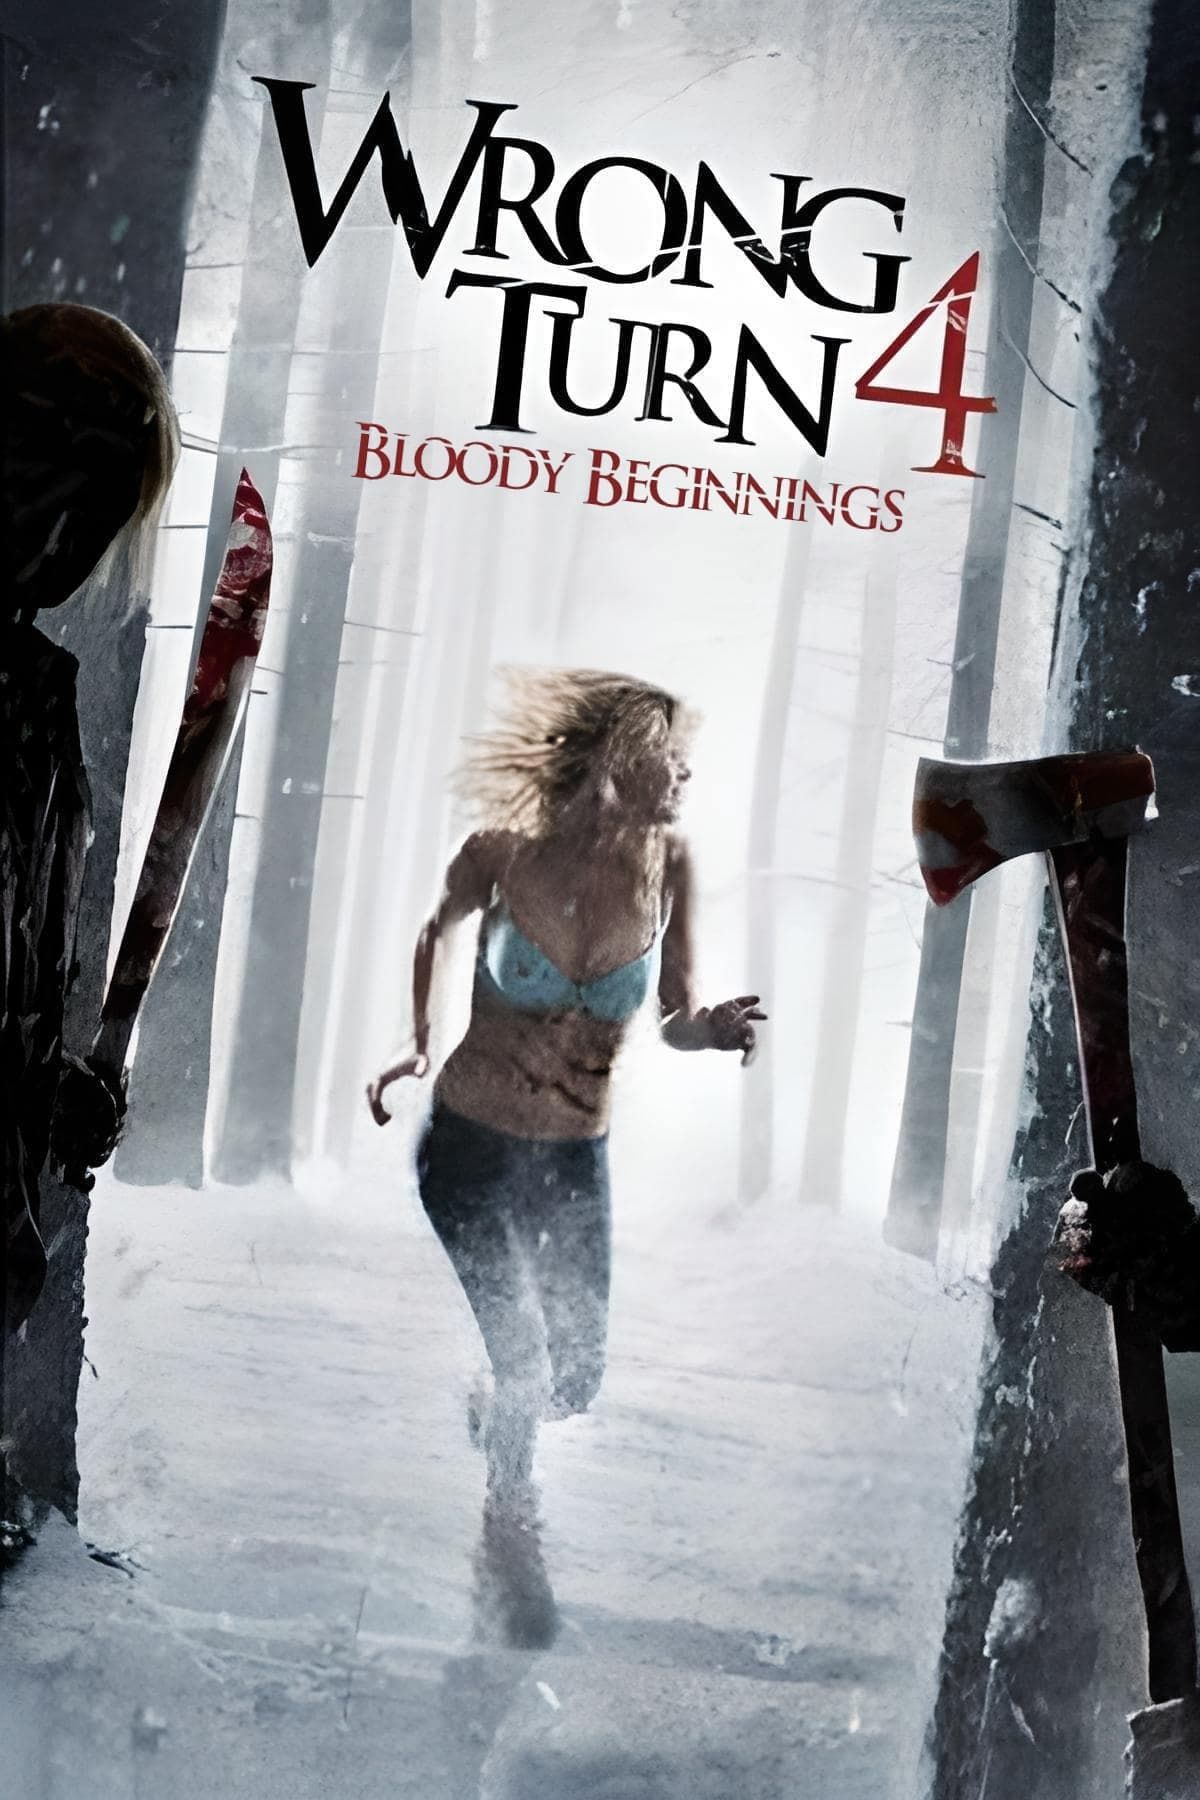 cuong thi recommends wrong turn full movie online pic